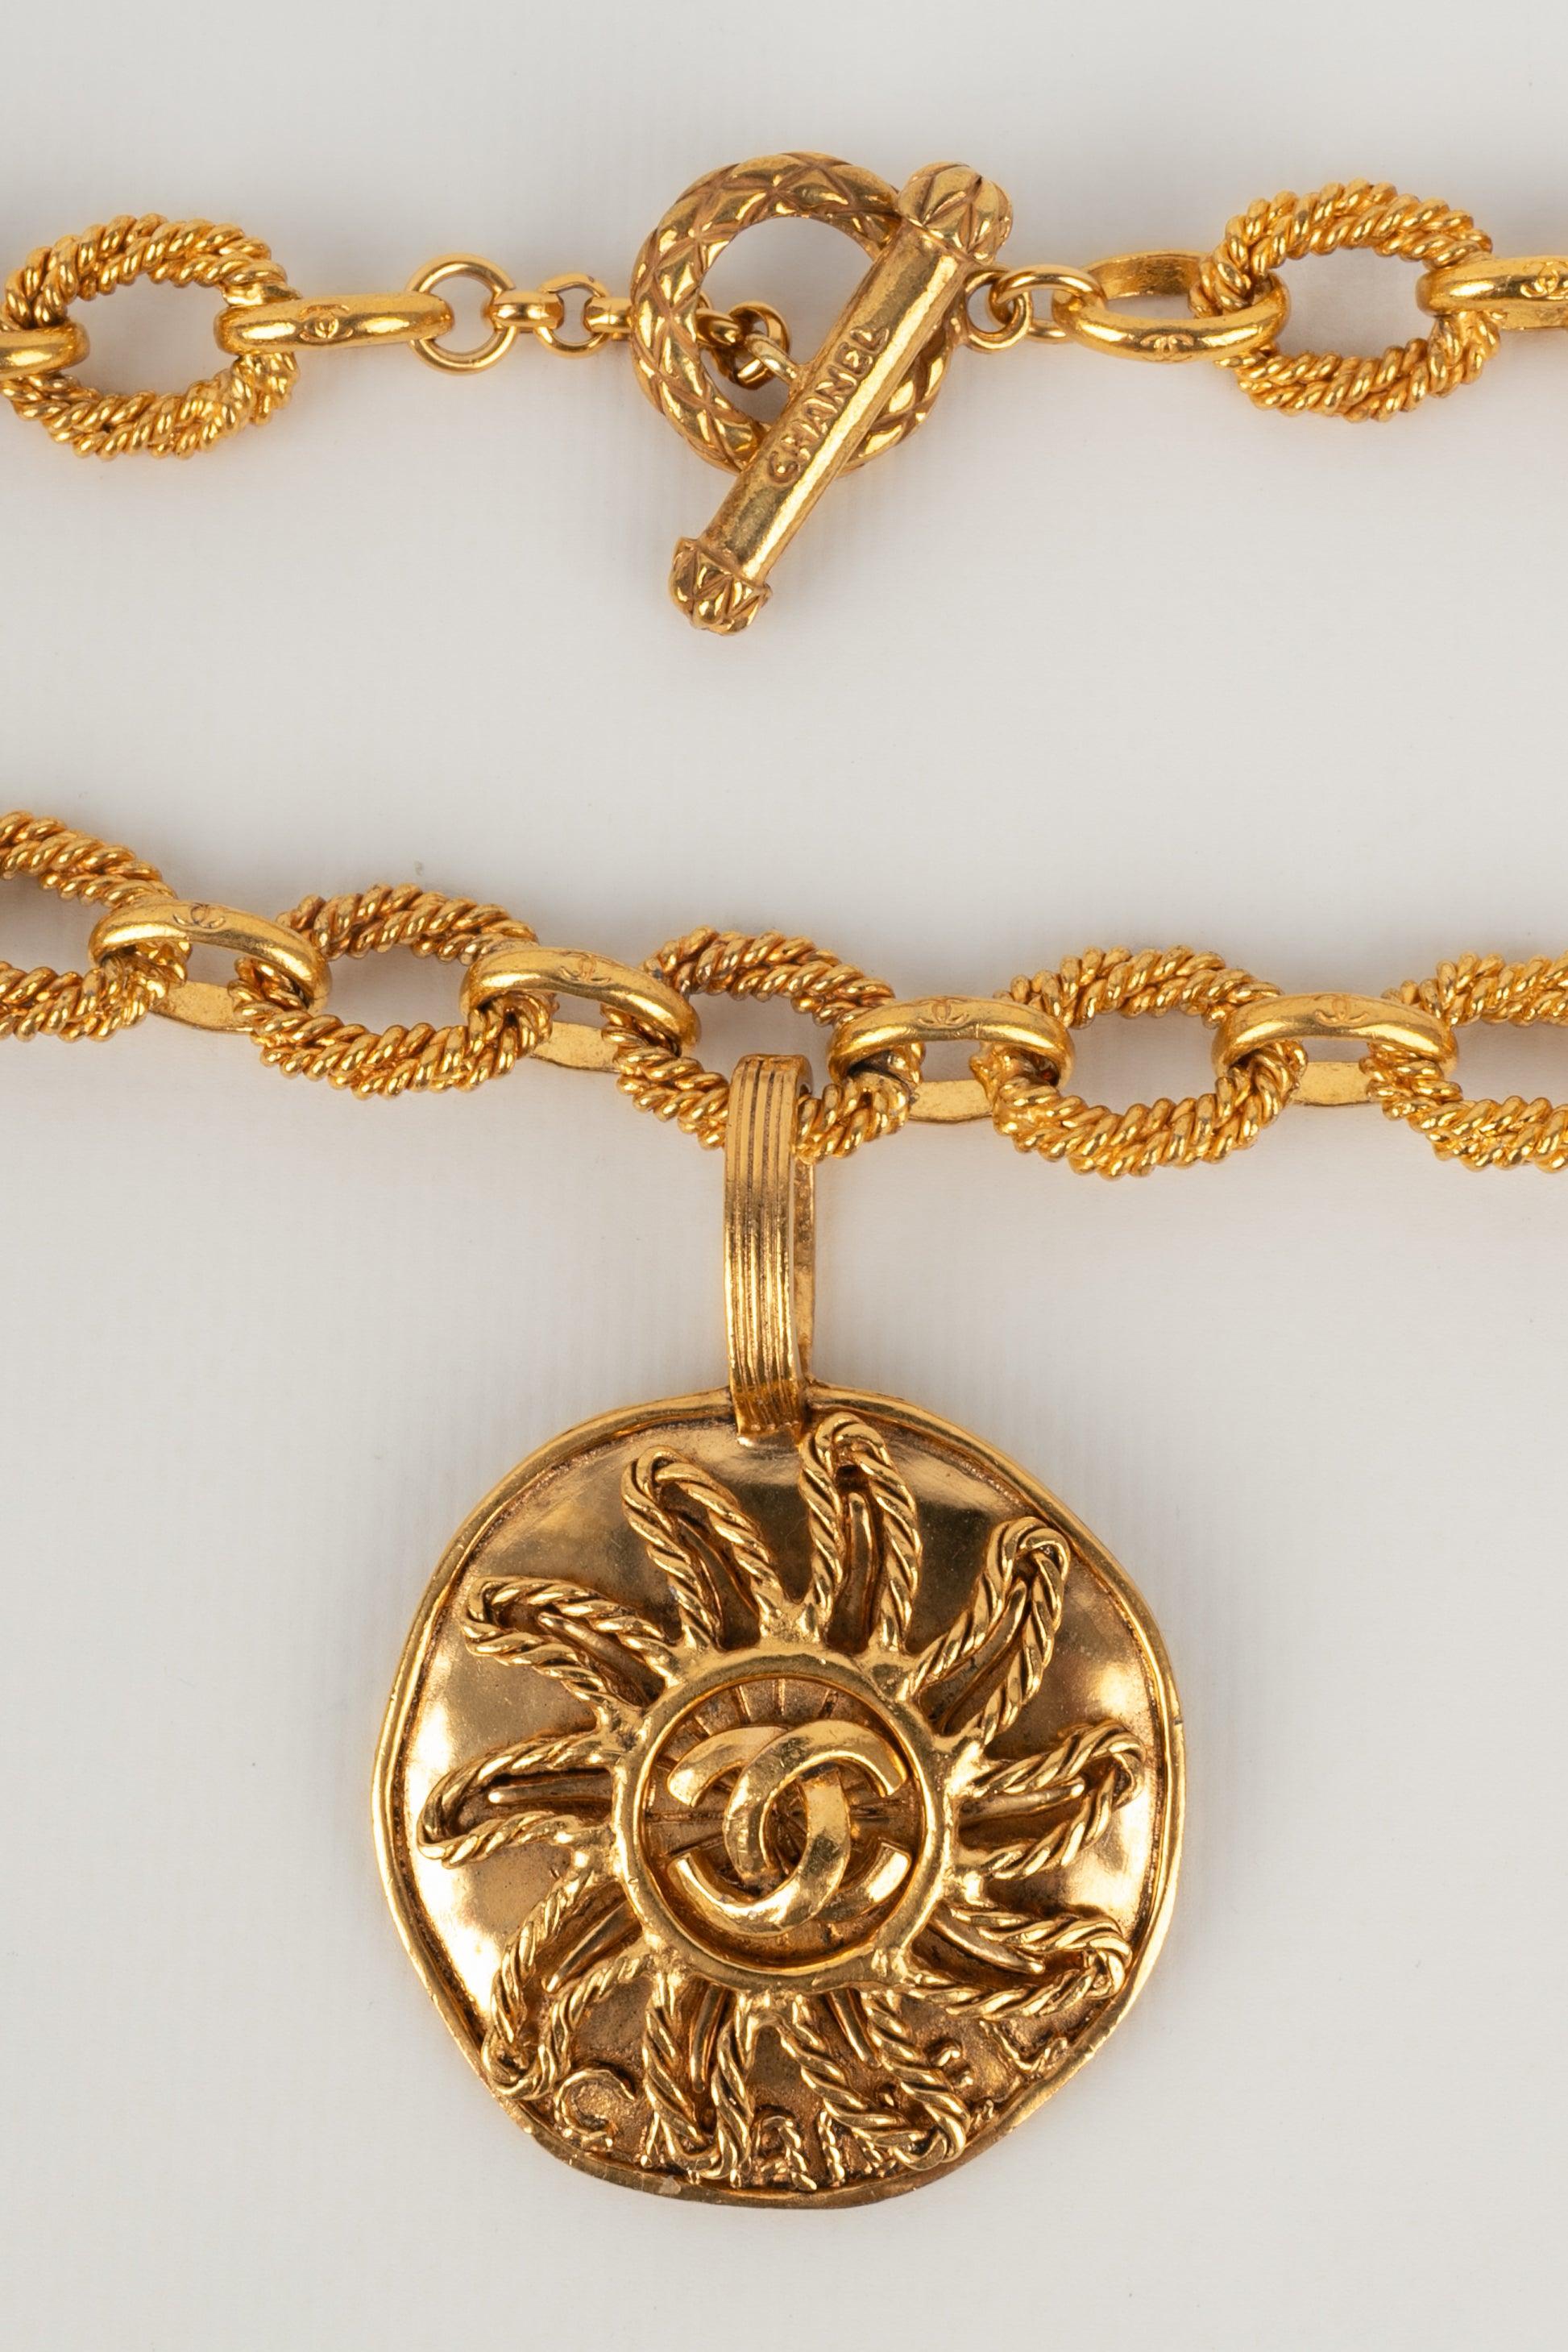 Chanel (Made in France) Golden metal necklace with a sun pendant. 1993 Fall-Winter Collection.

Additional Information:
Condition: Very good condition
Dimensions: Length: 83 cm
Period: 20th Century

Seller Reference: CB34